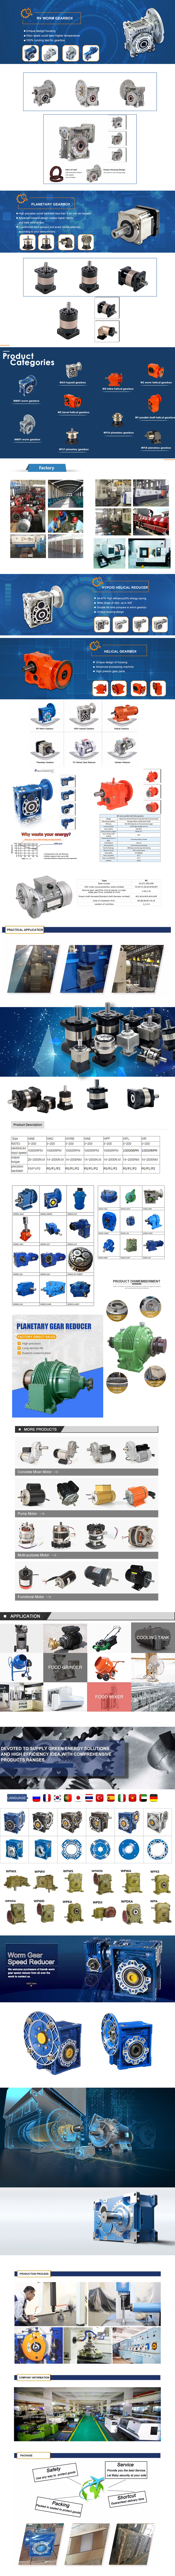   in Diyarbakir Turkey  sales   price   shop   near me   near me shop   factory   supplier K Series Gear Reducer  Gearbox Motor Gearbox Electric Motor with Reduction Gear Micro Cycloidal Gearbox Transmission Gear Box manufacturer   best   Cost   Custom   Cheap   wholesaler 